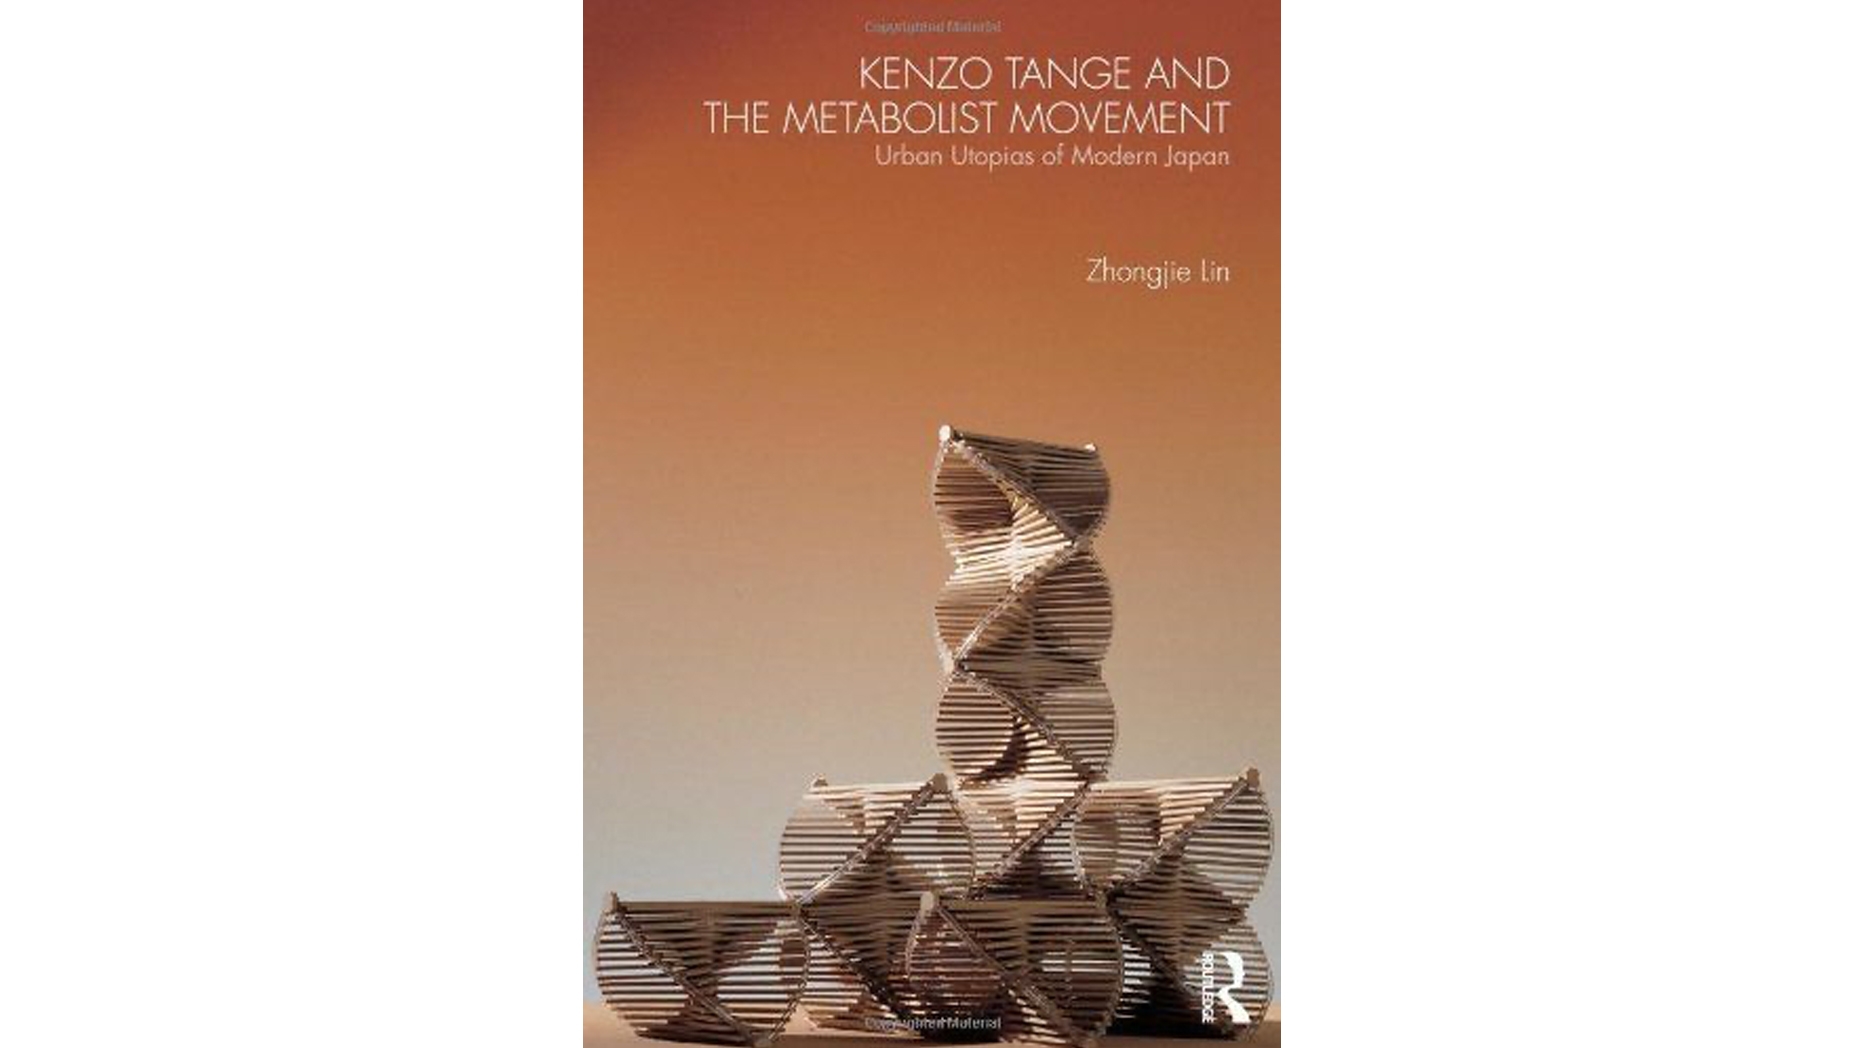 Kenzo Tange and the Metabolist Movement book cover